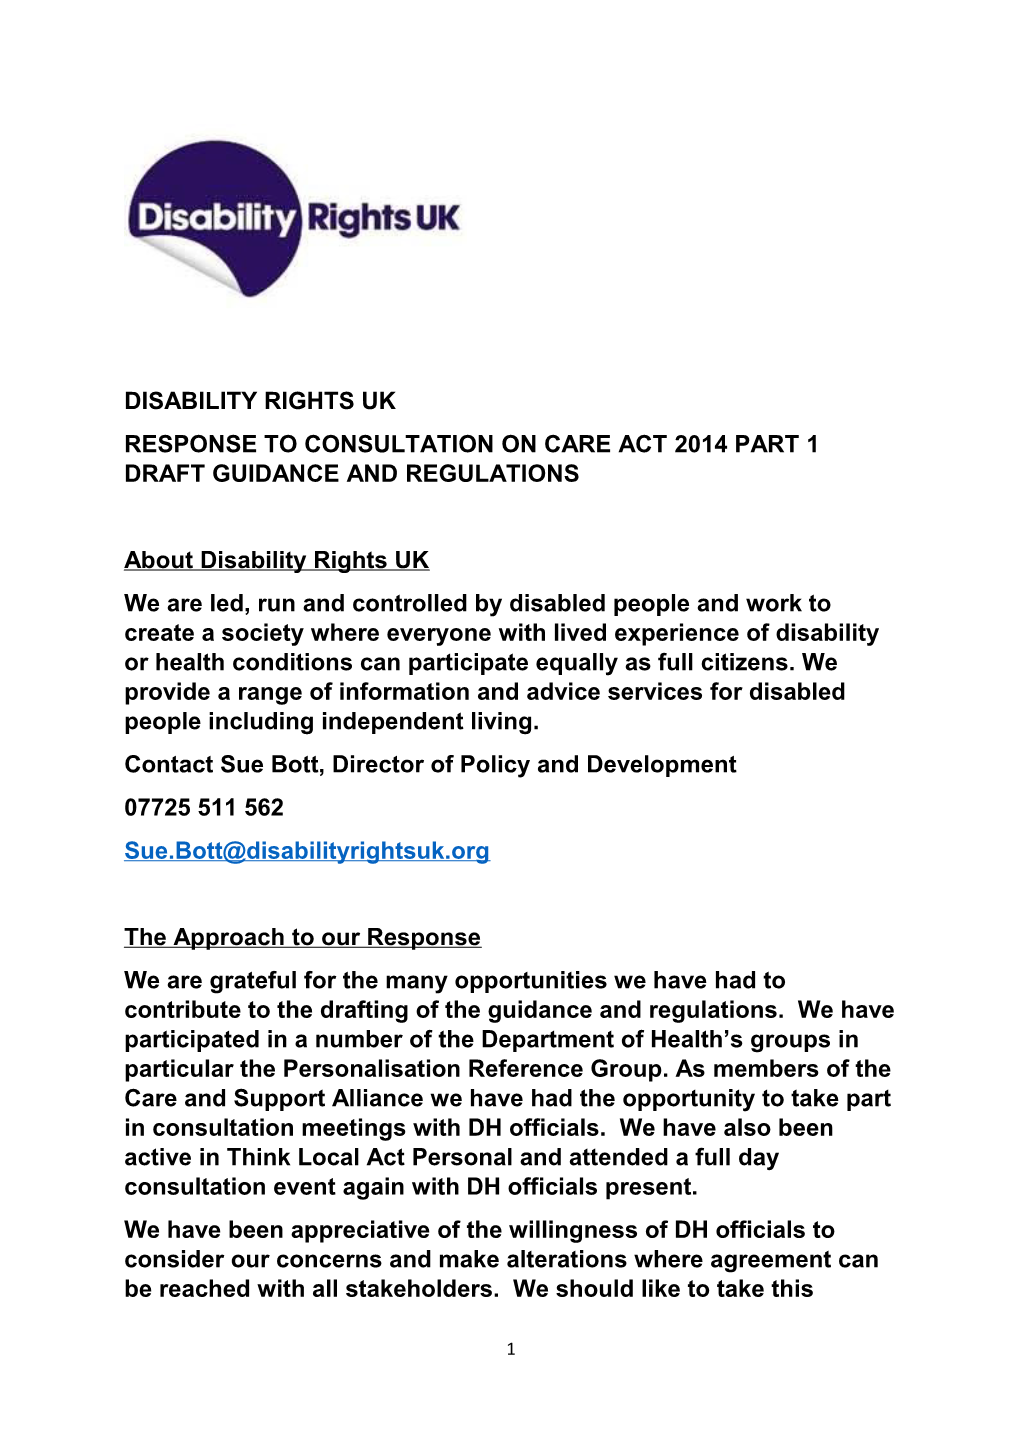 Response to Consultation on Care Act 2014 Part 1 Draft Guidance and Regulations